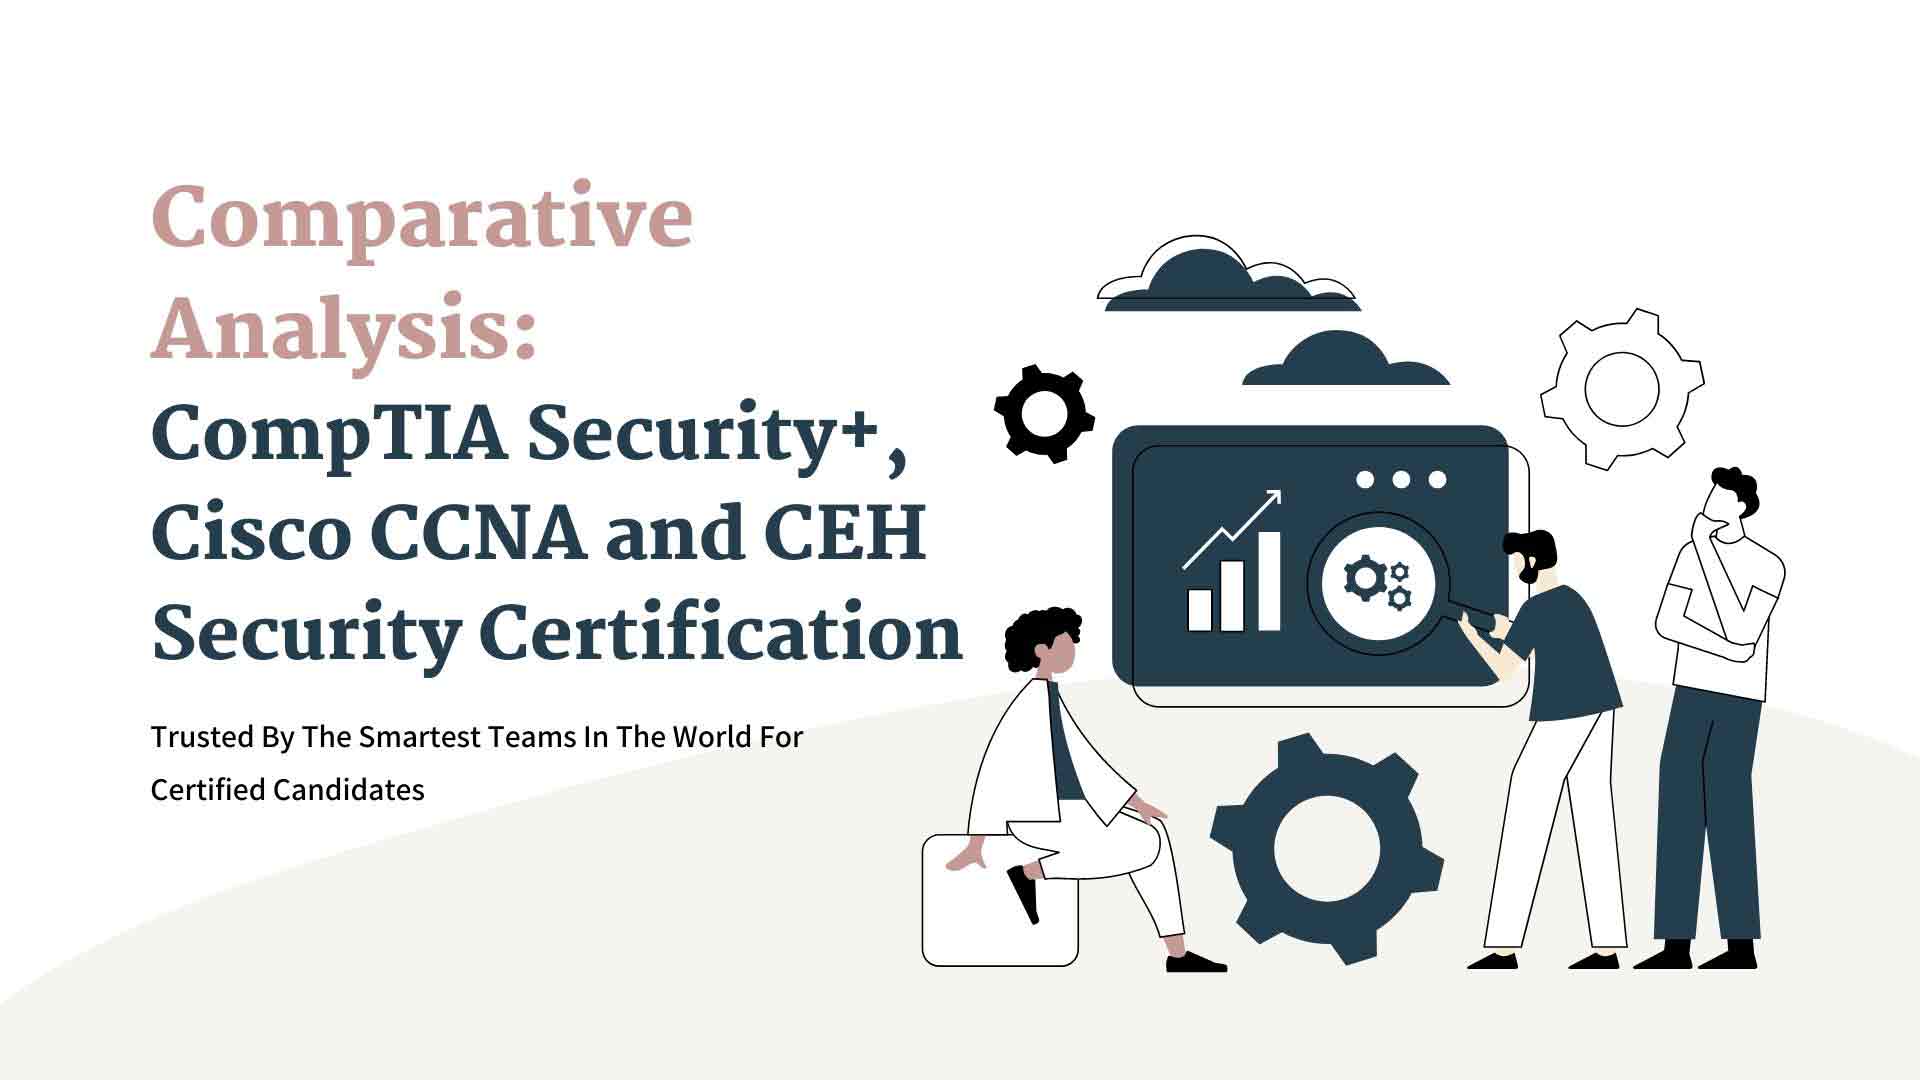 Comparative Analysis of CompTIA Security